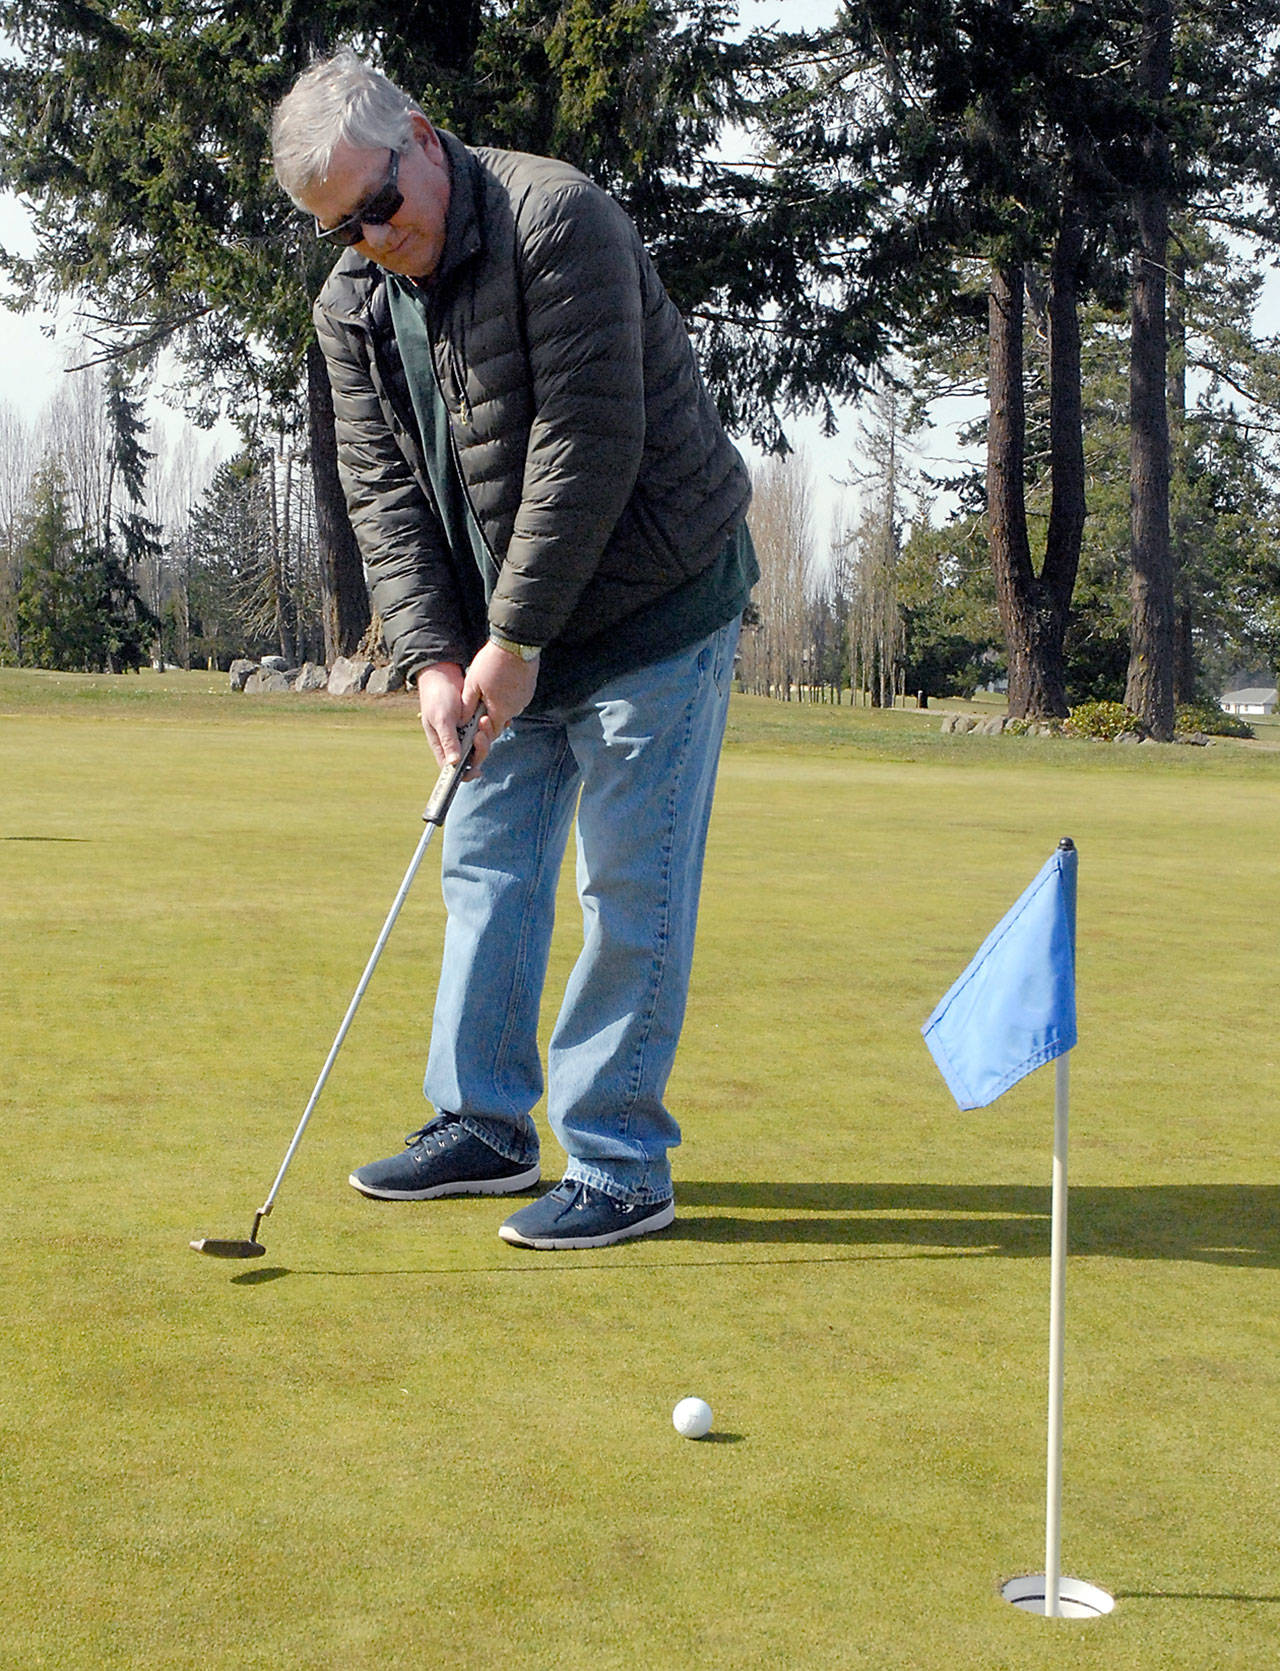 Jim Root of Port Angeles practices his putting Tuesday at Peninsula Golf Course in Port Angeles. (Keith Thorpe/Peninsula Daily News)